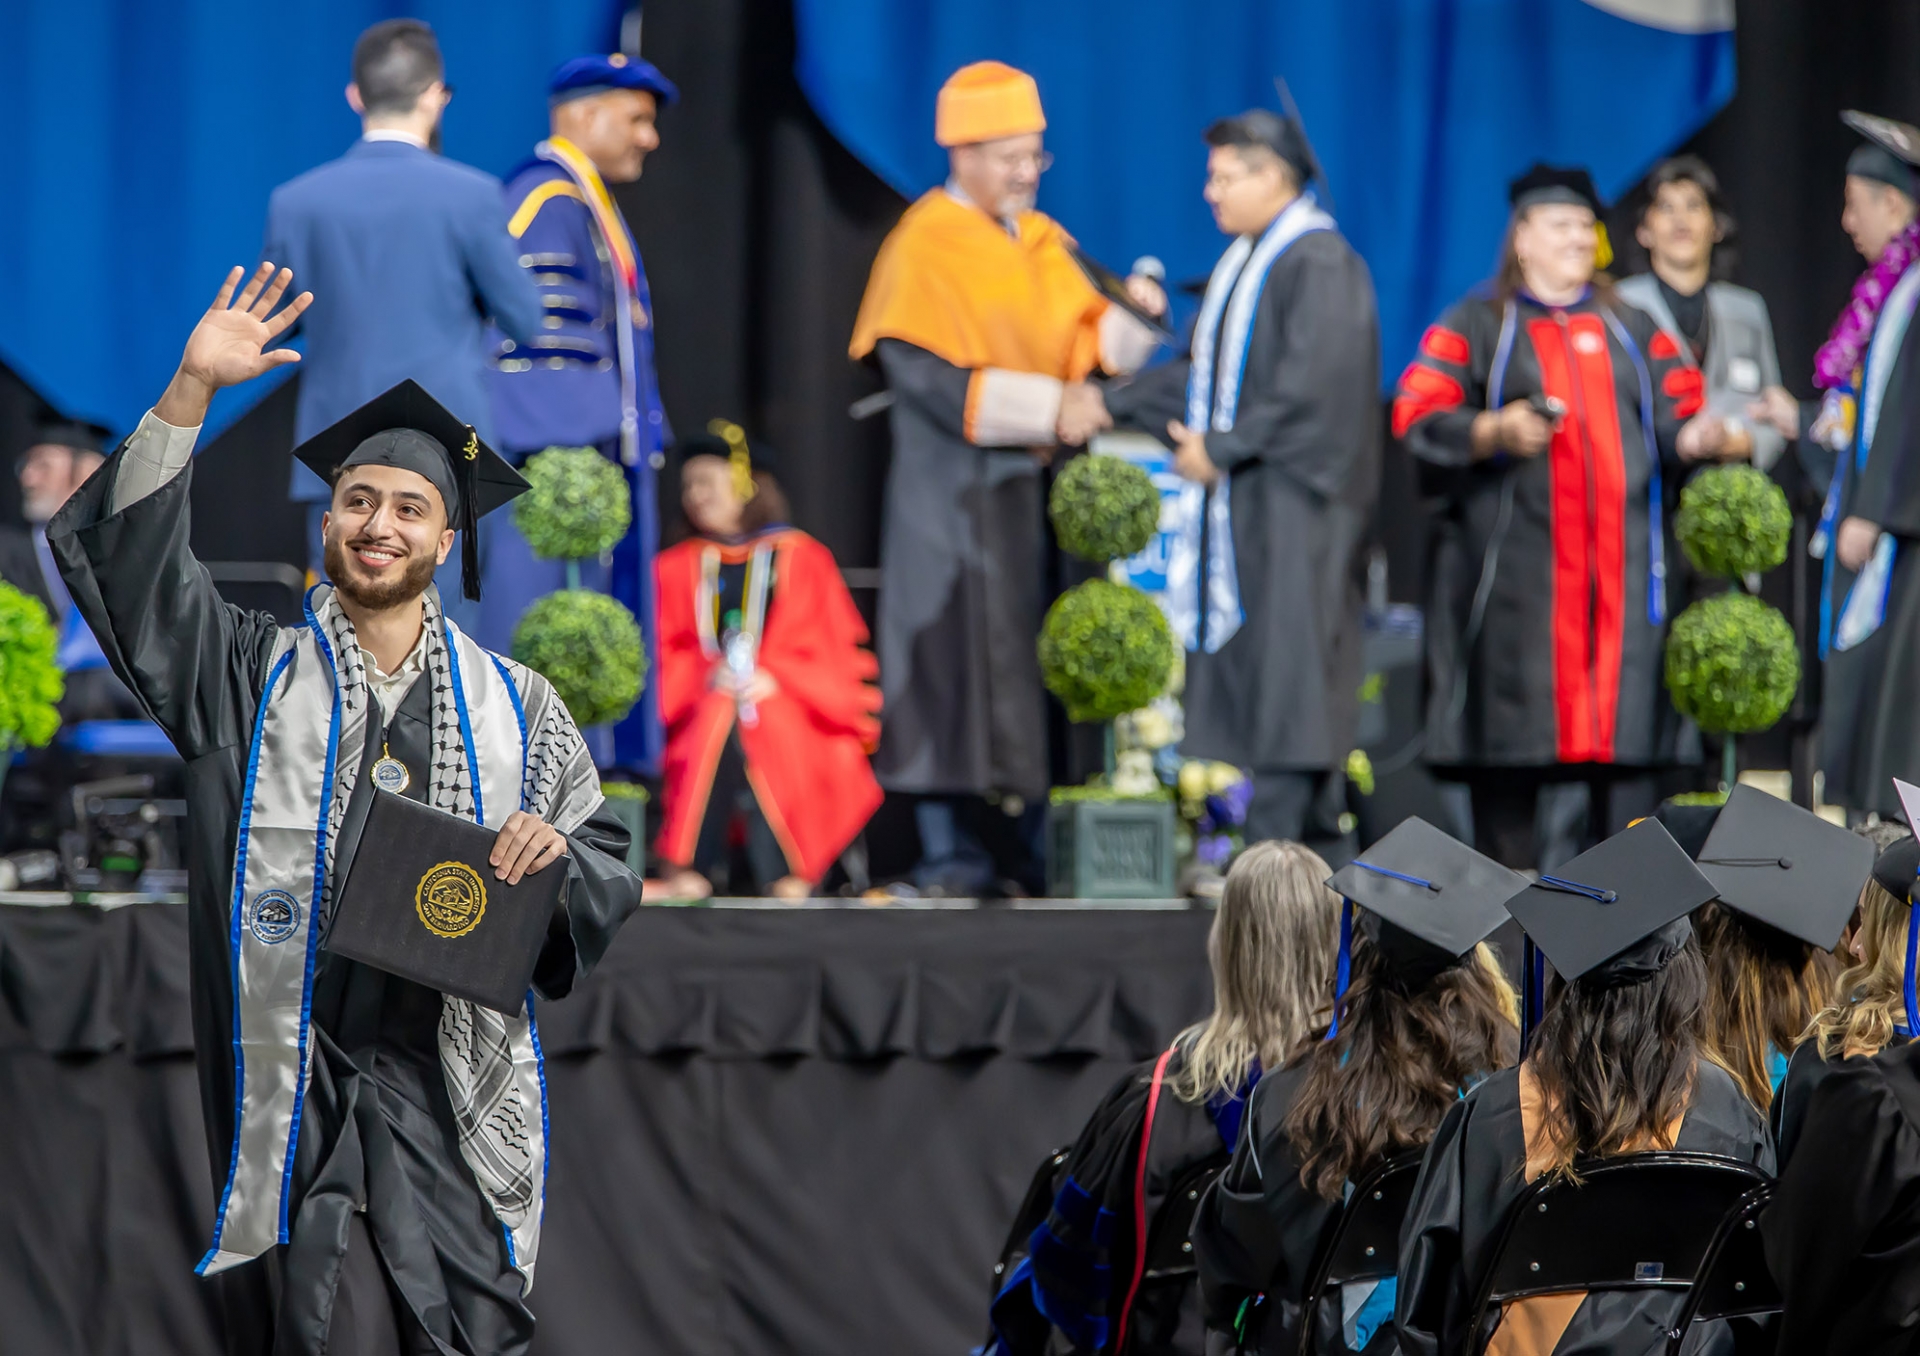 A graduate waves to the crowd during the Jack H. Browd College of Business and Public Administration’s ceremony on May 20.